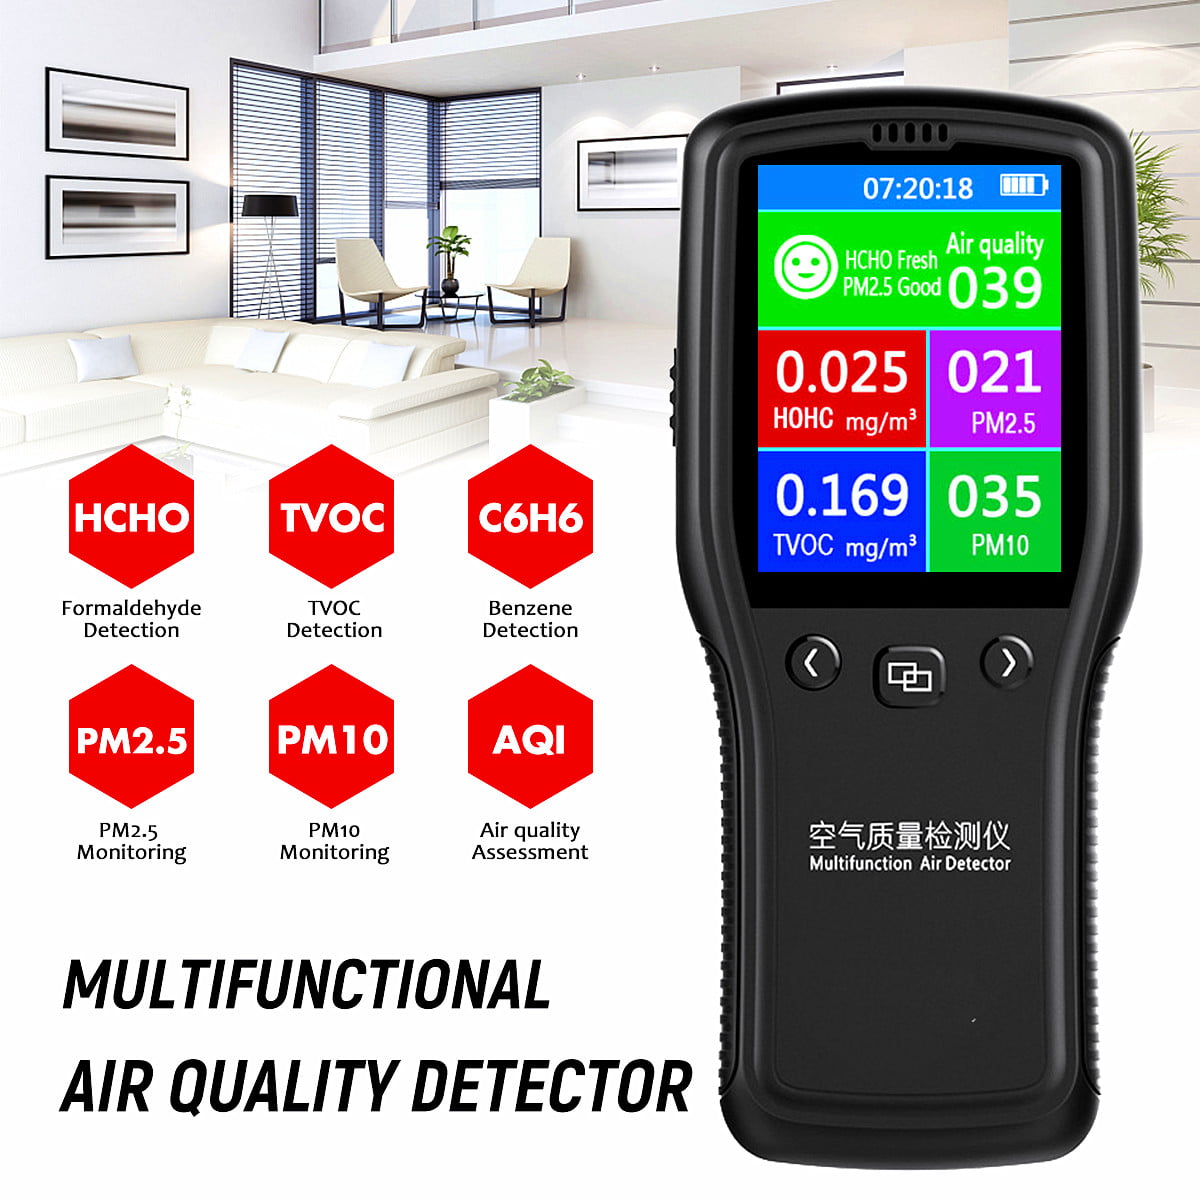 High Accuracy Temperature Monitor 3 Inch Screen for Conference Room Office C6H6 Monitoring Formaldehyde Detector Romantic PresentFormaldehyde Monitor Air 